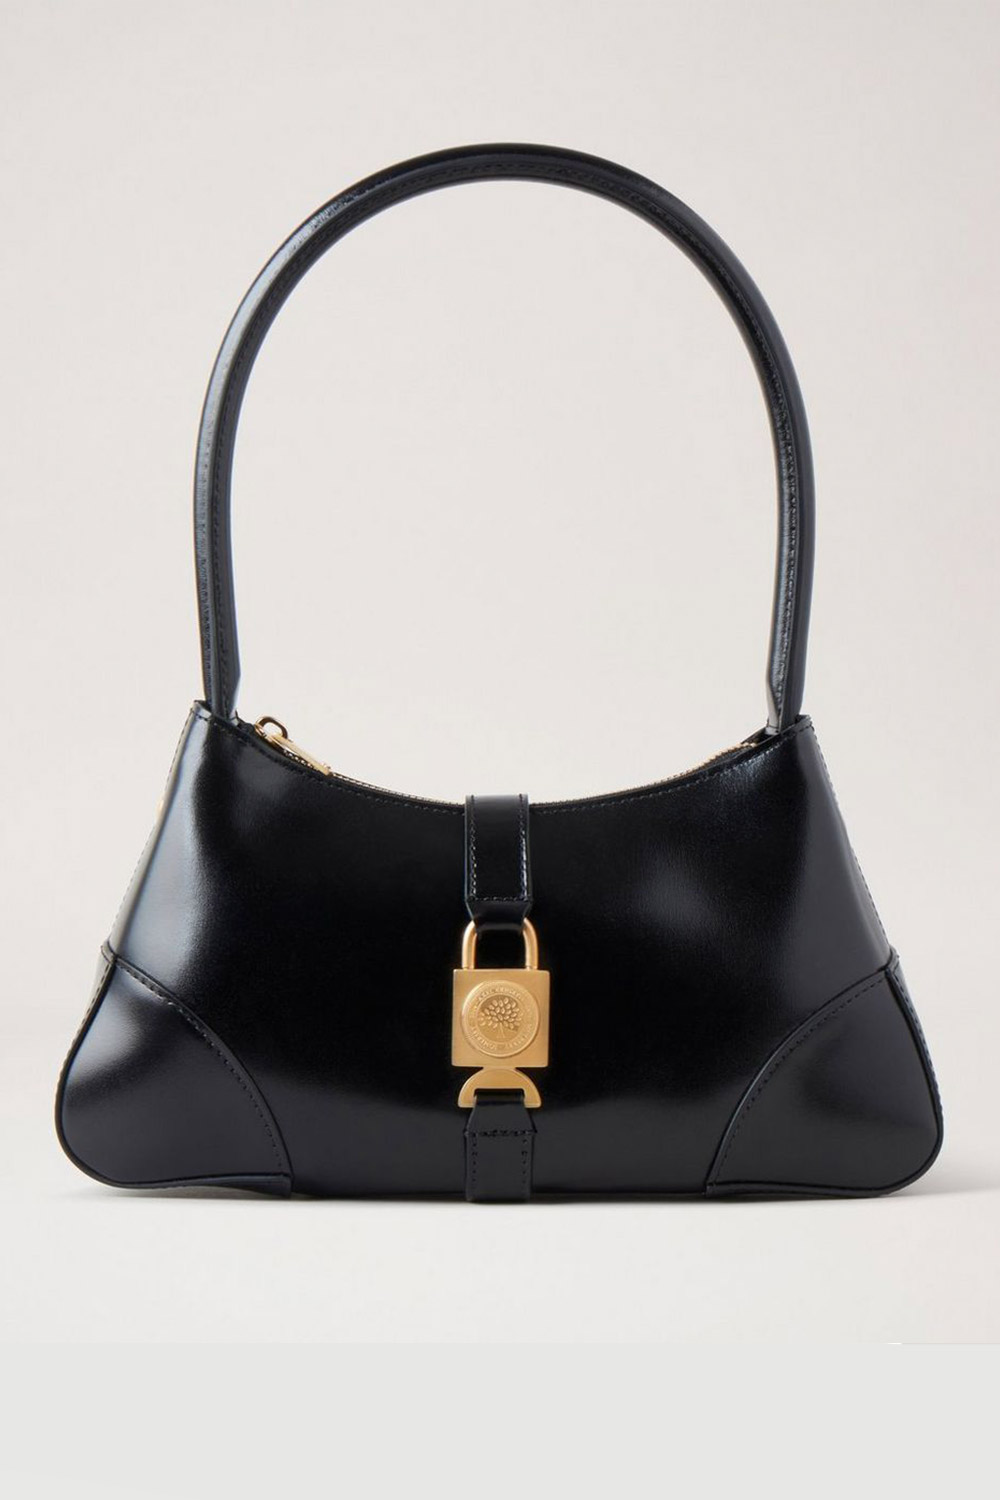 The must-have pieces from the Mulberry x Axel Arigato collaboration ...